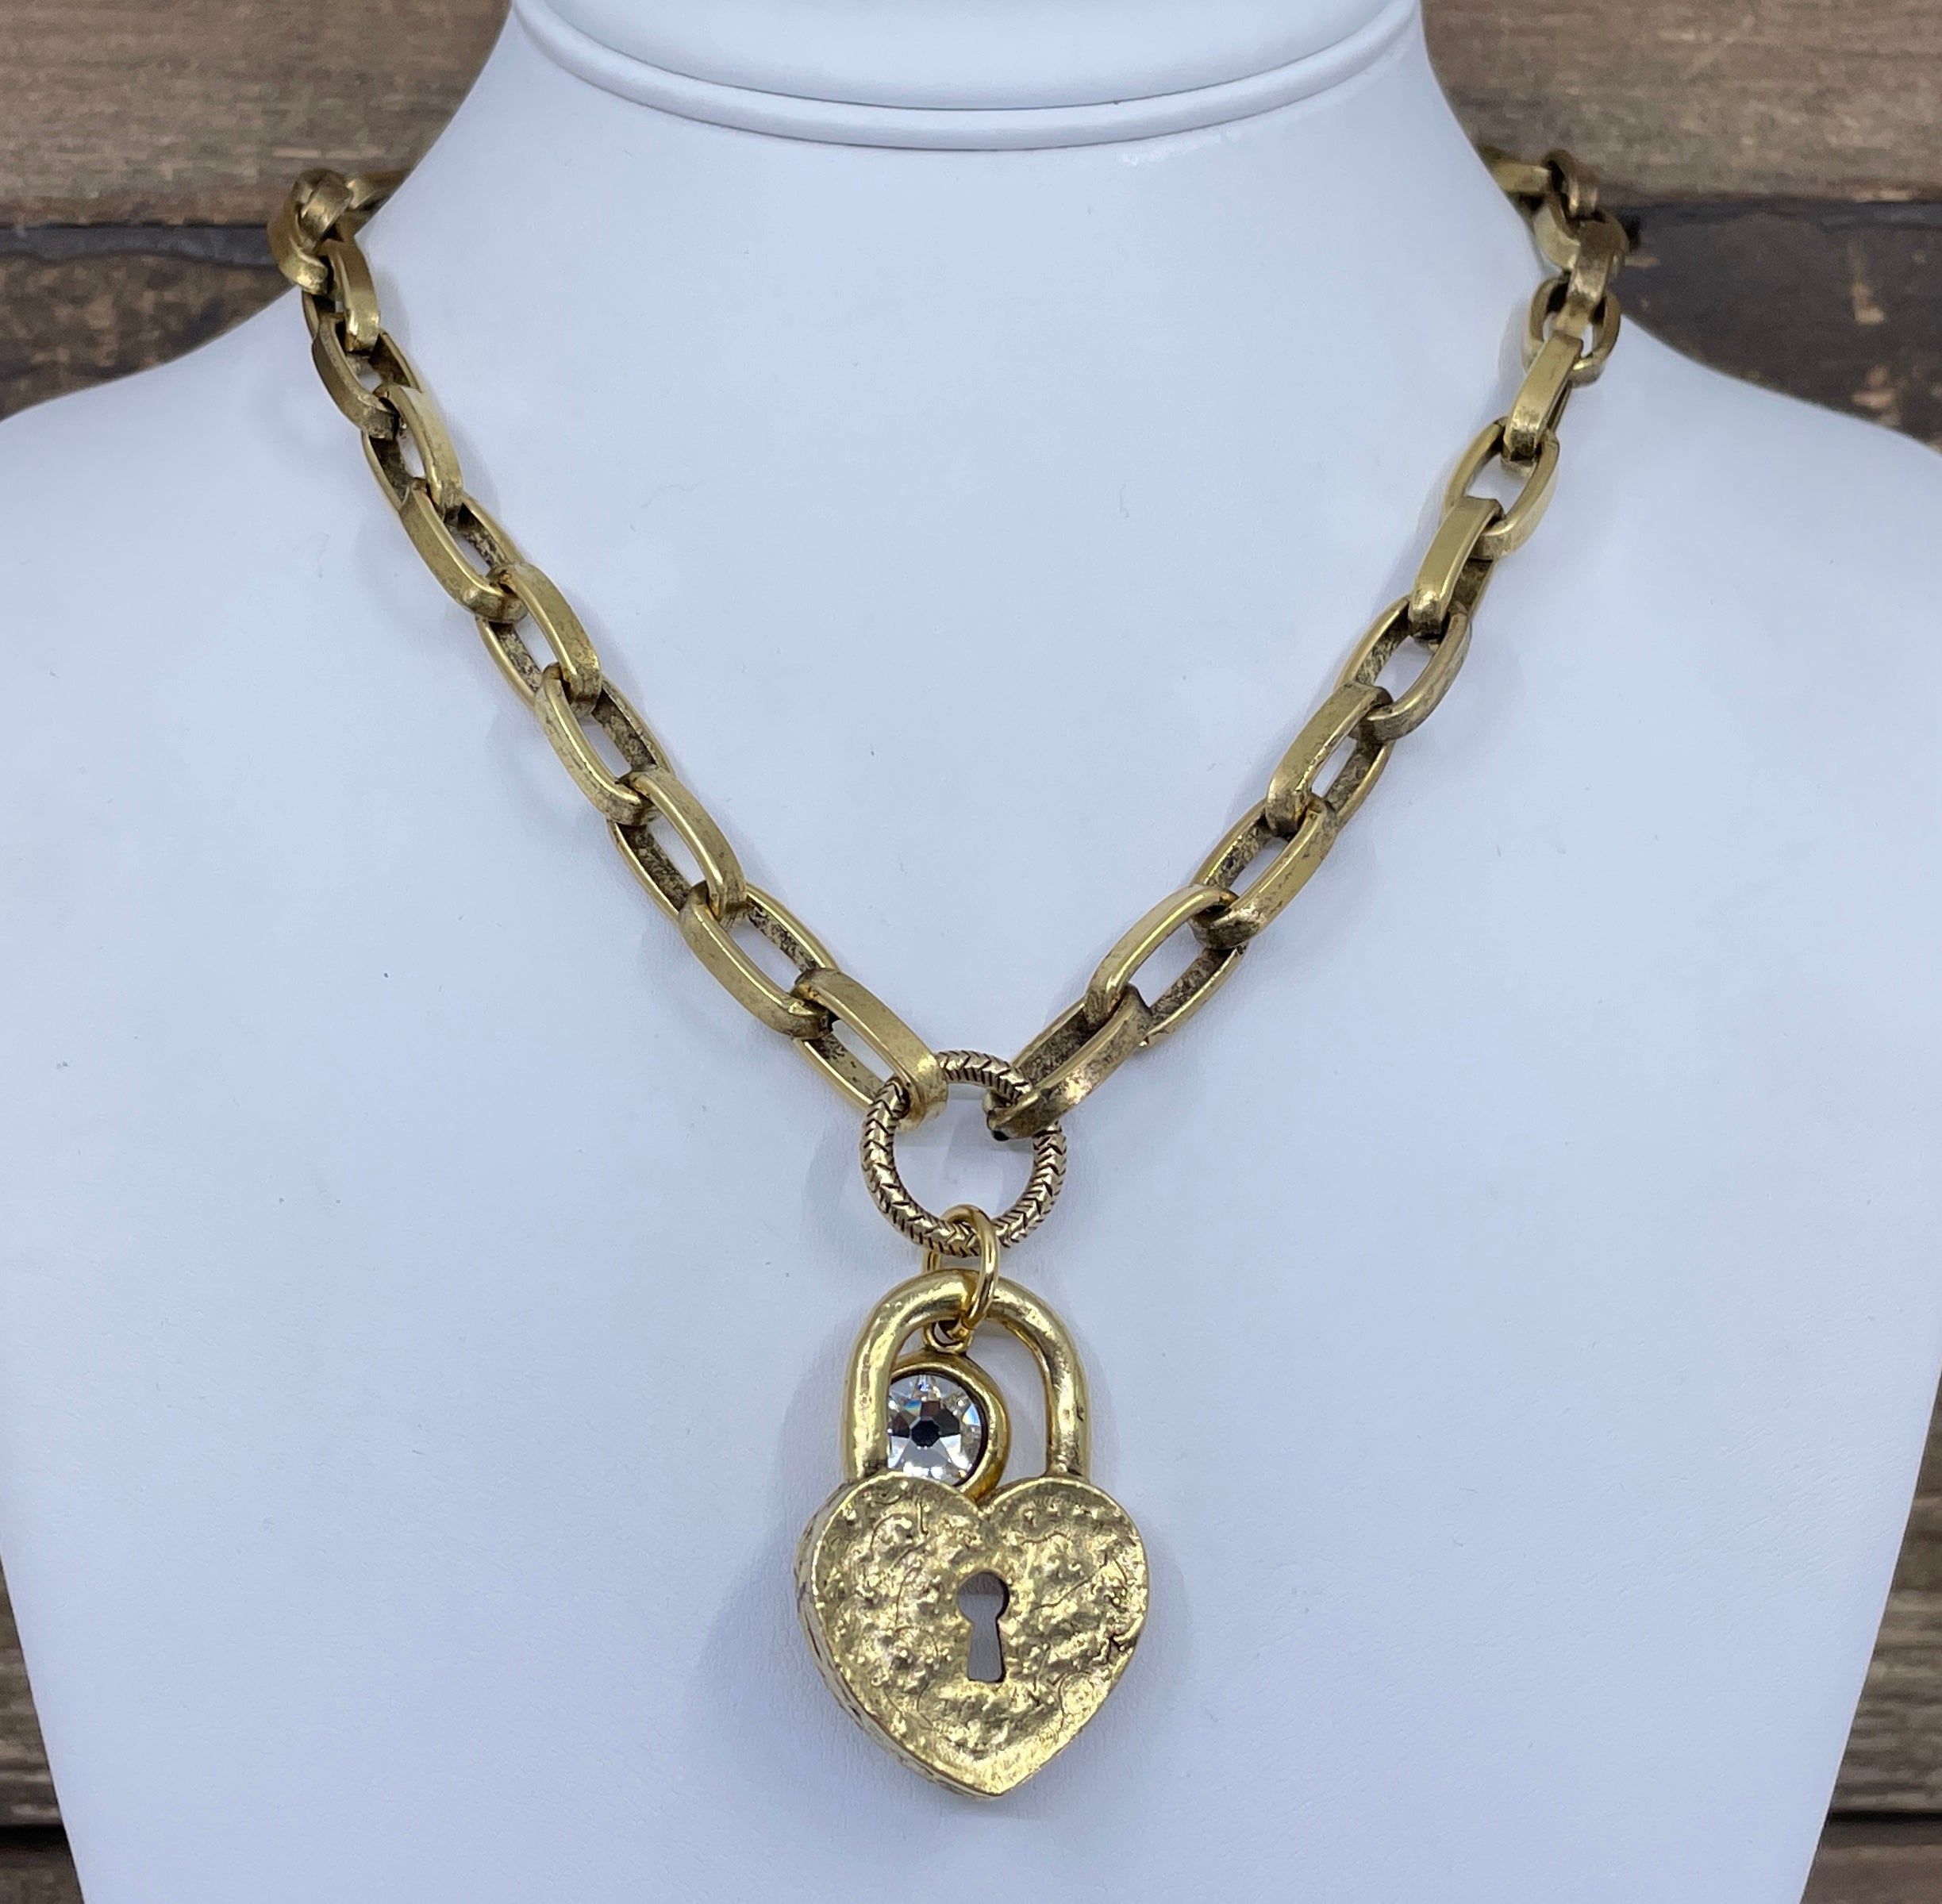 Gold and Silver lock necklace